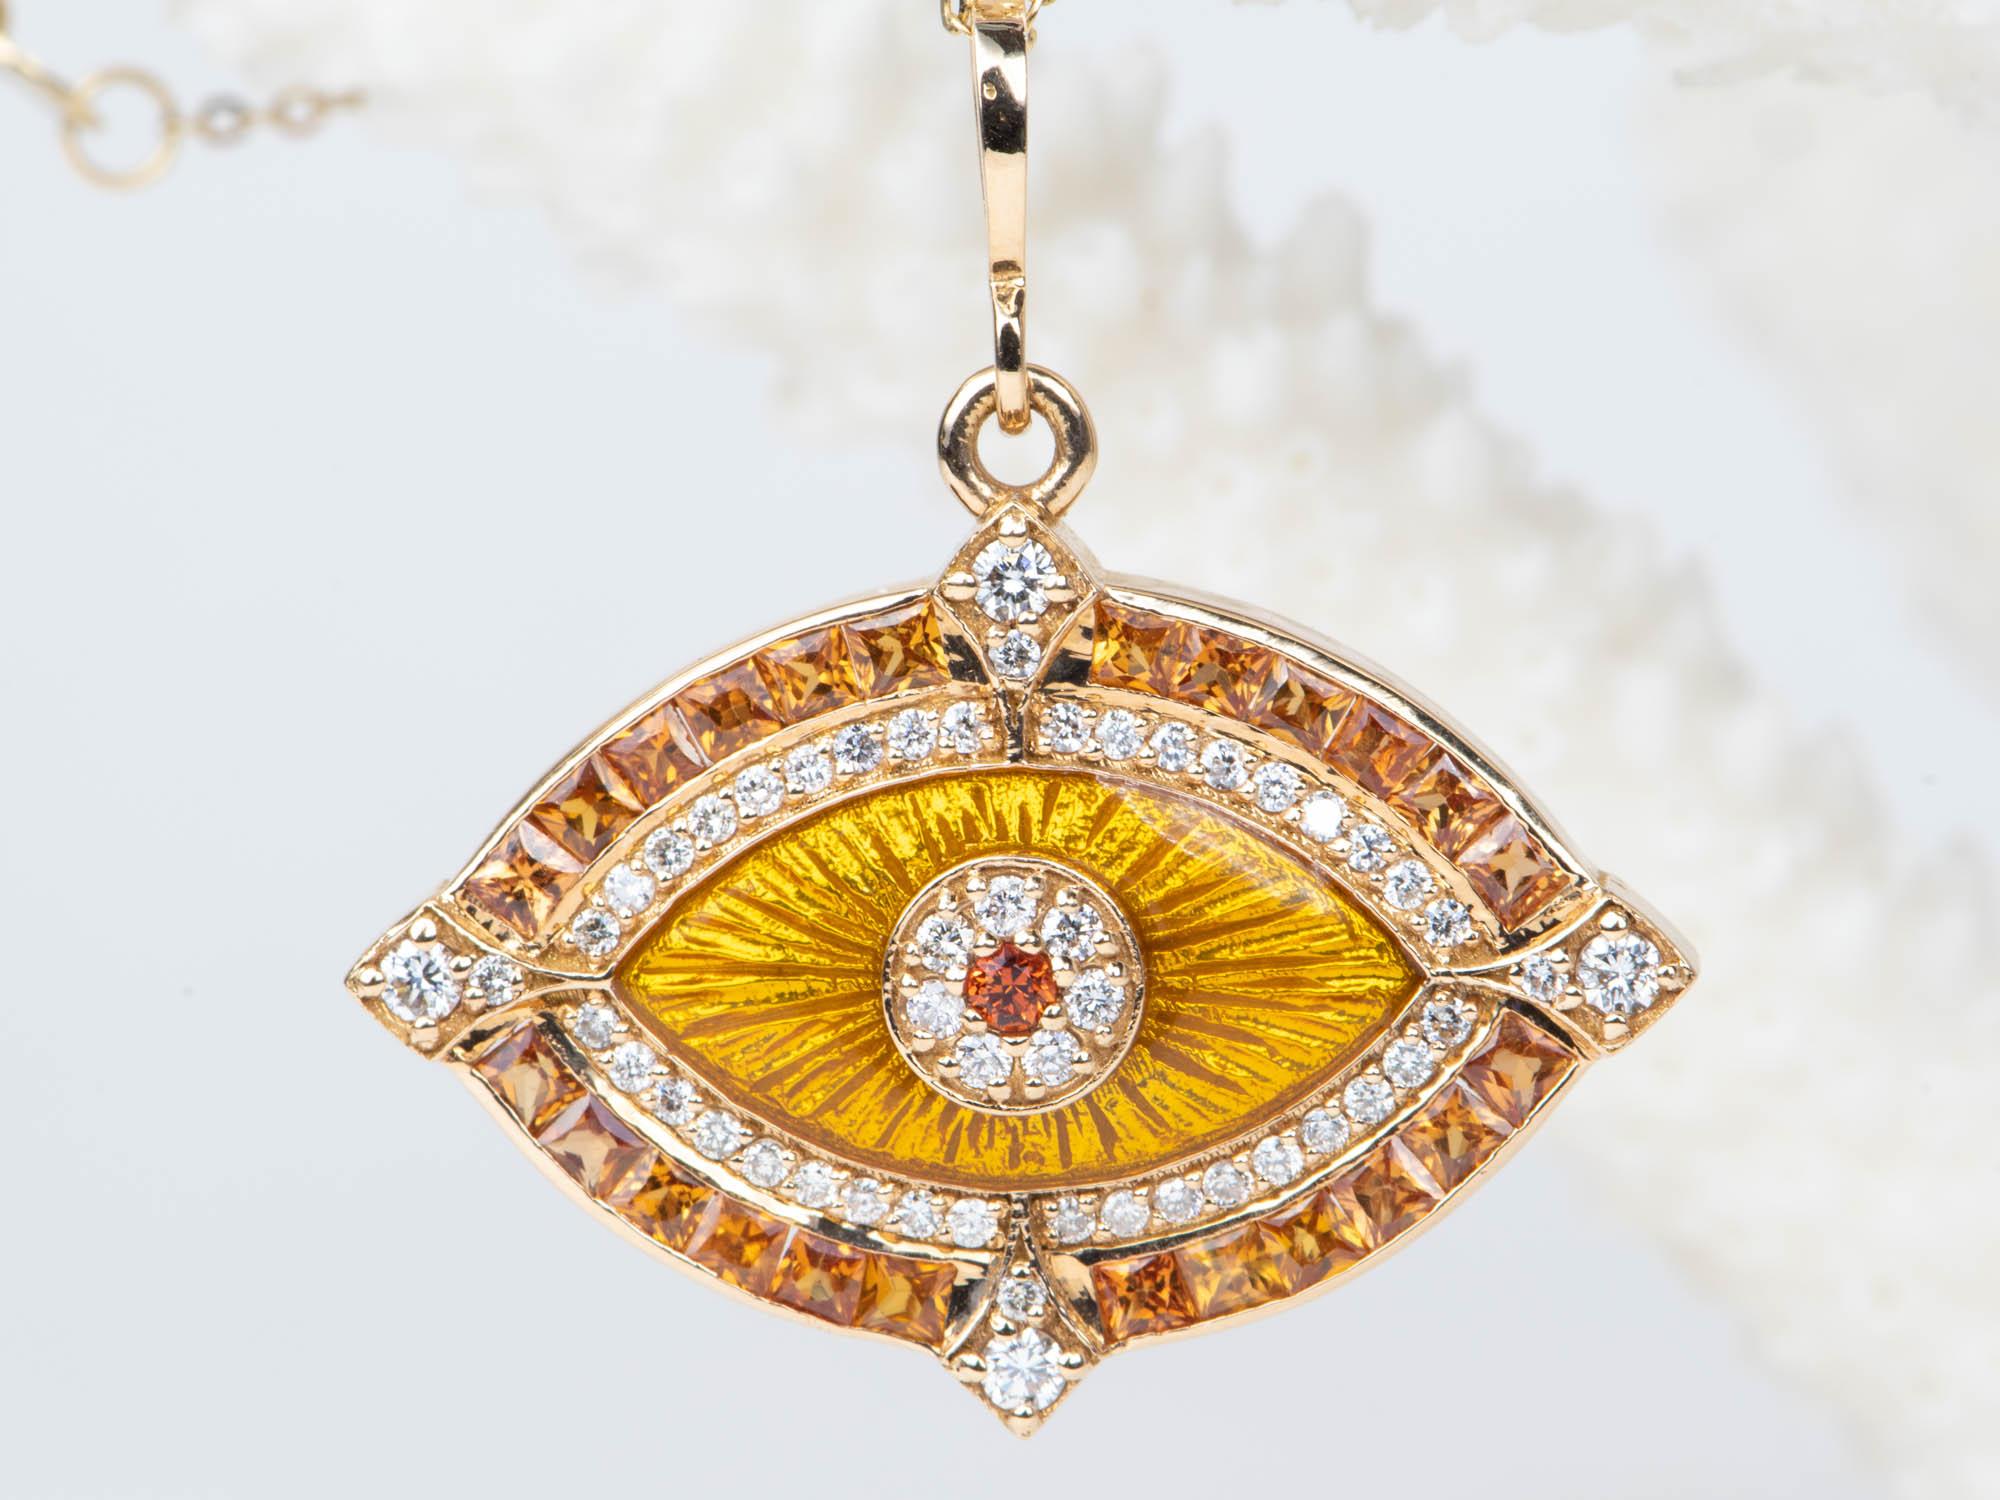 ♥ A solid 18K gold evil eye pendant featuring gorgeous princess-cut orange sapphires and diamonds
♥ This pendant features an inner halo of guilloche enamel
♥ The pendant measures 20mm in length, 24.2mm in width, and 4.8mm thick.
♥ Material: 18K